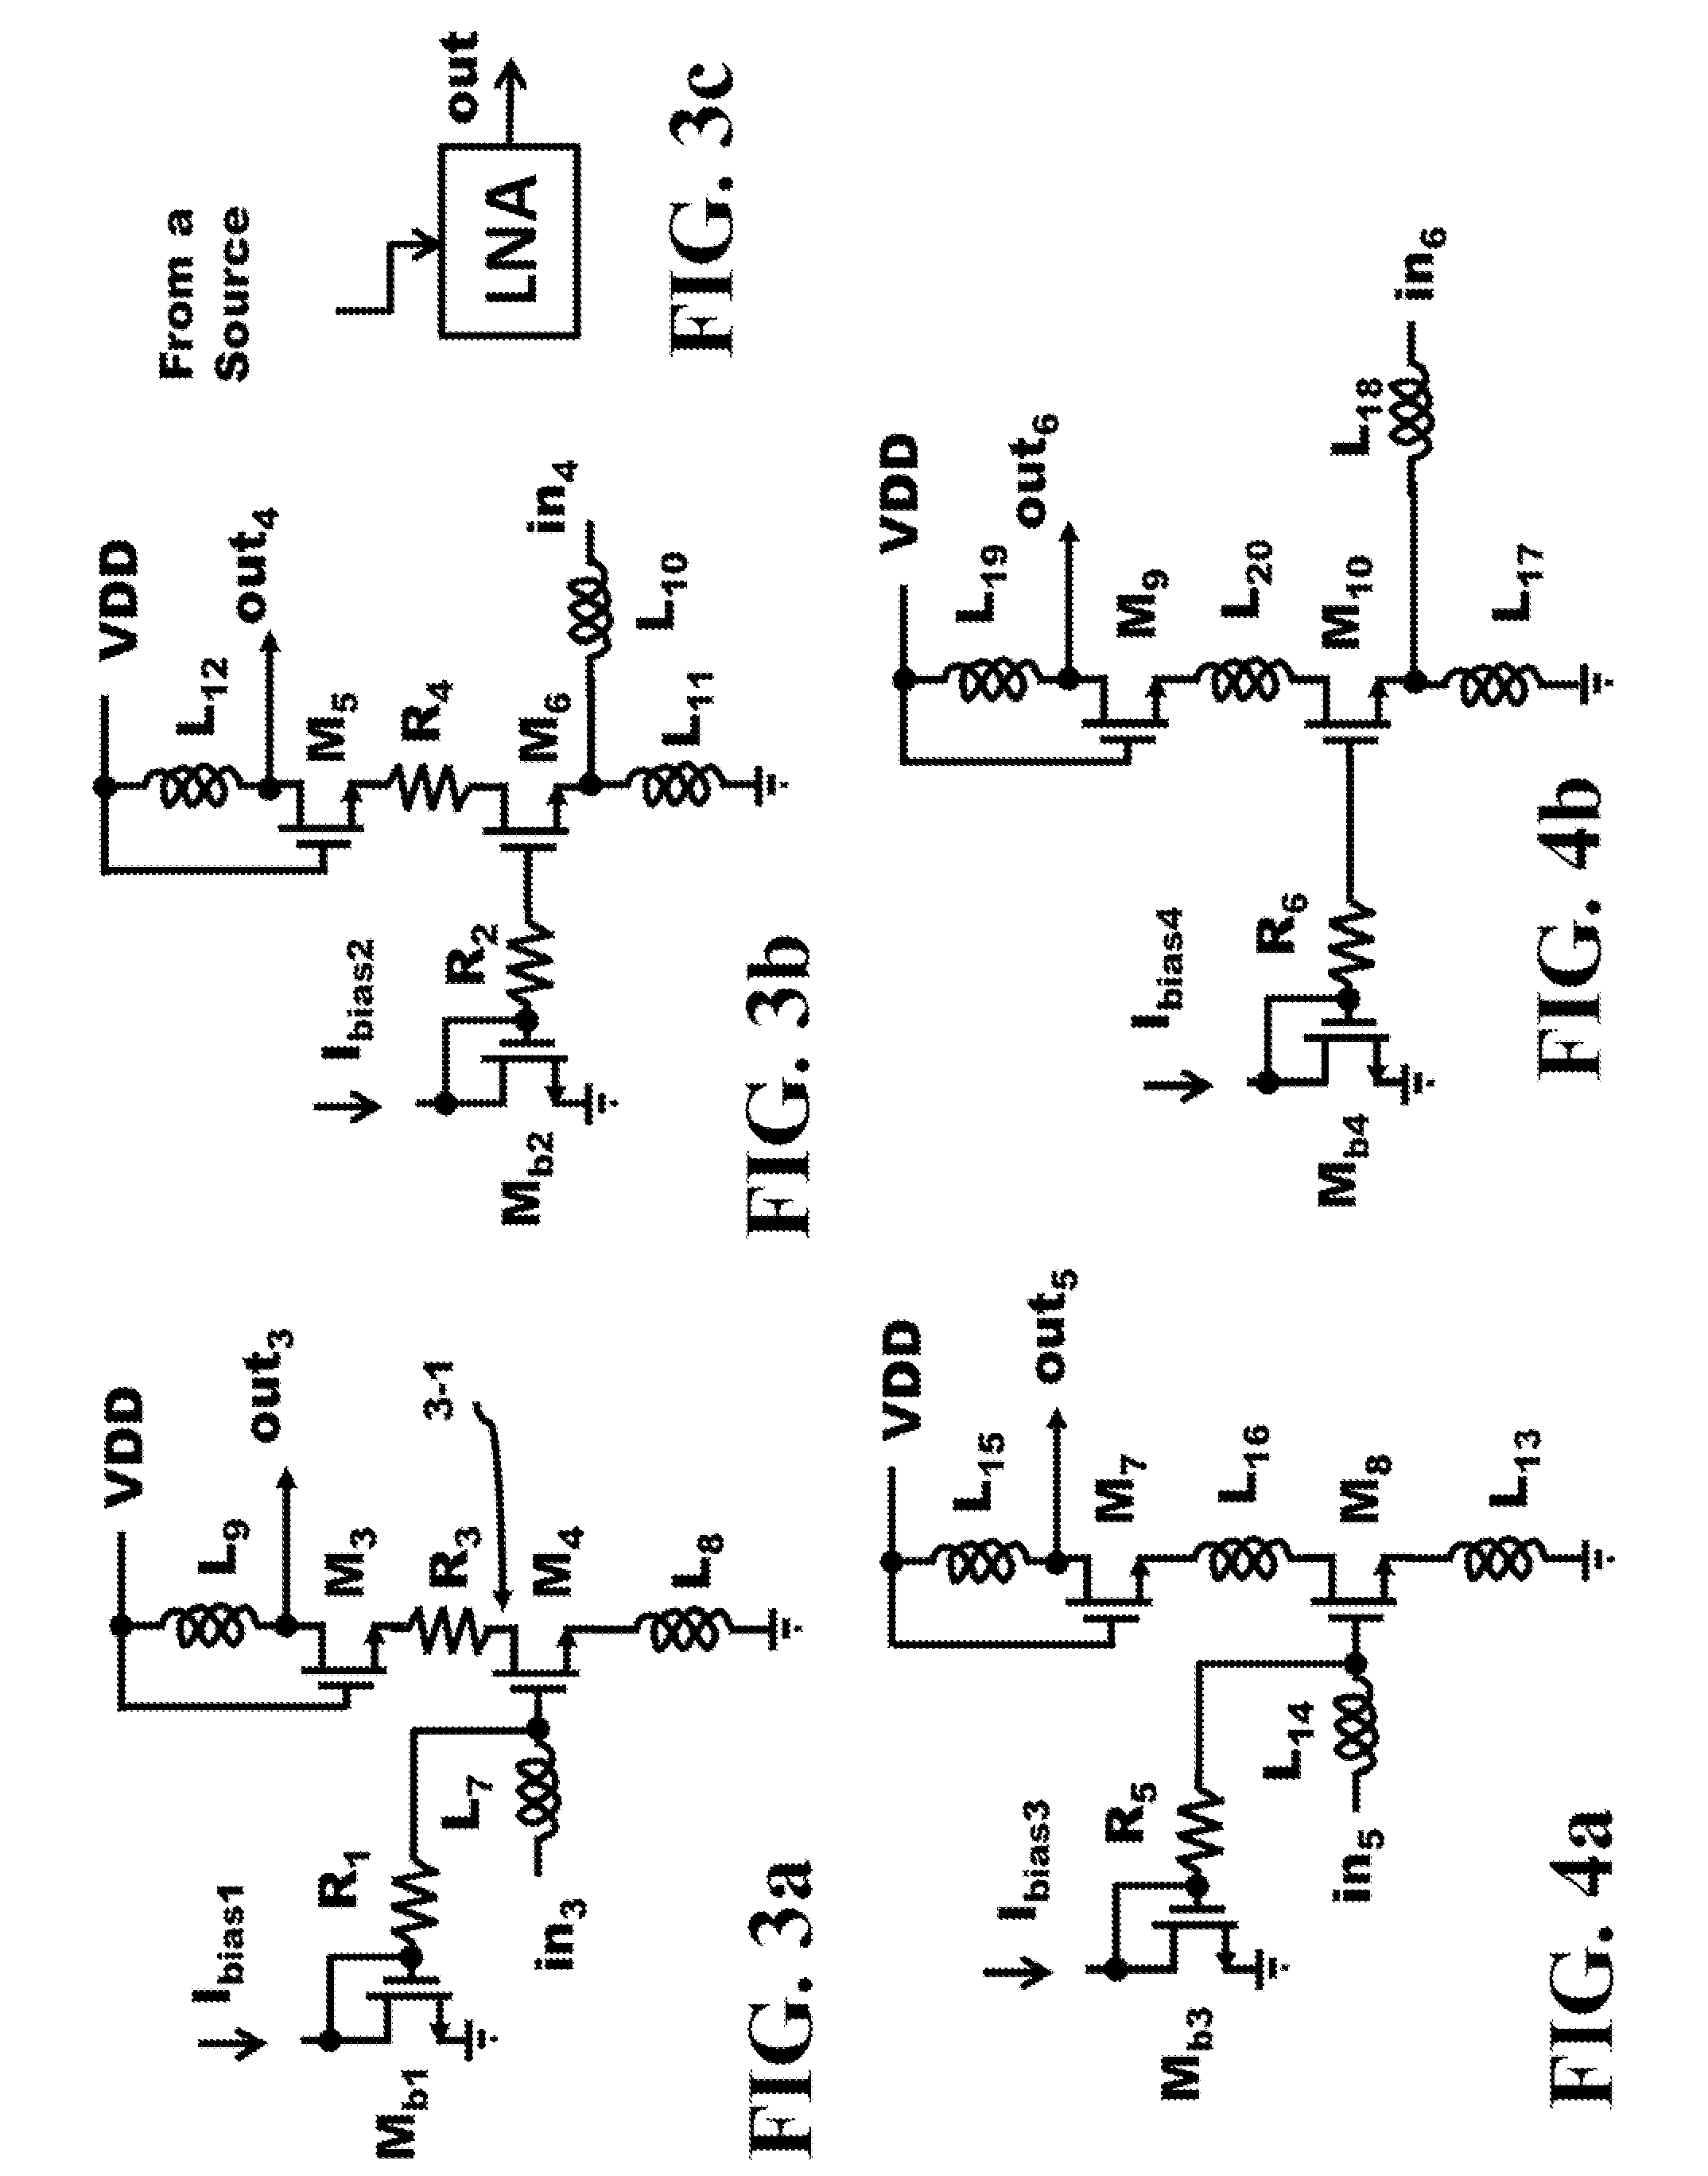 Method and Apparatus of an Input Resistance of a Passive Mixer to Broaden the Input Matching Bandwidth of a Common Source/Gate LNA